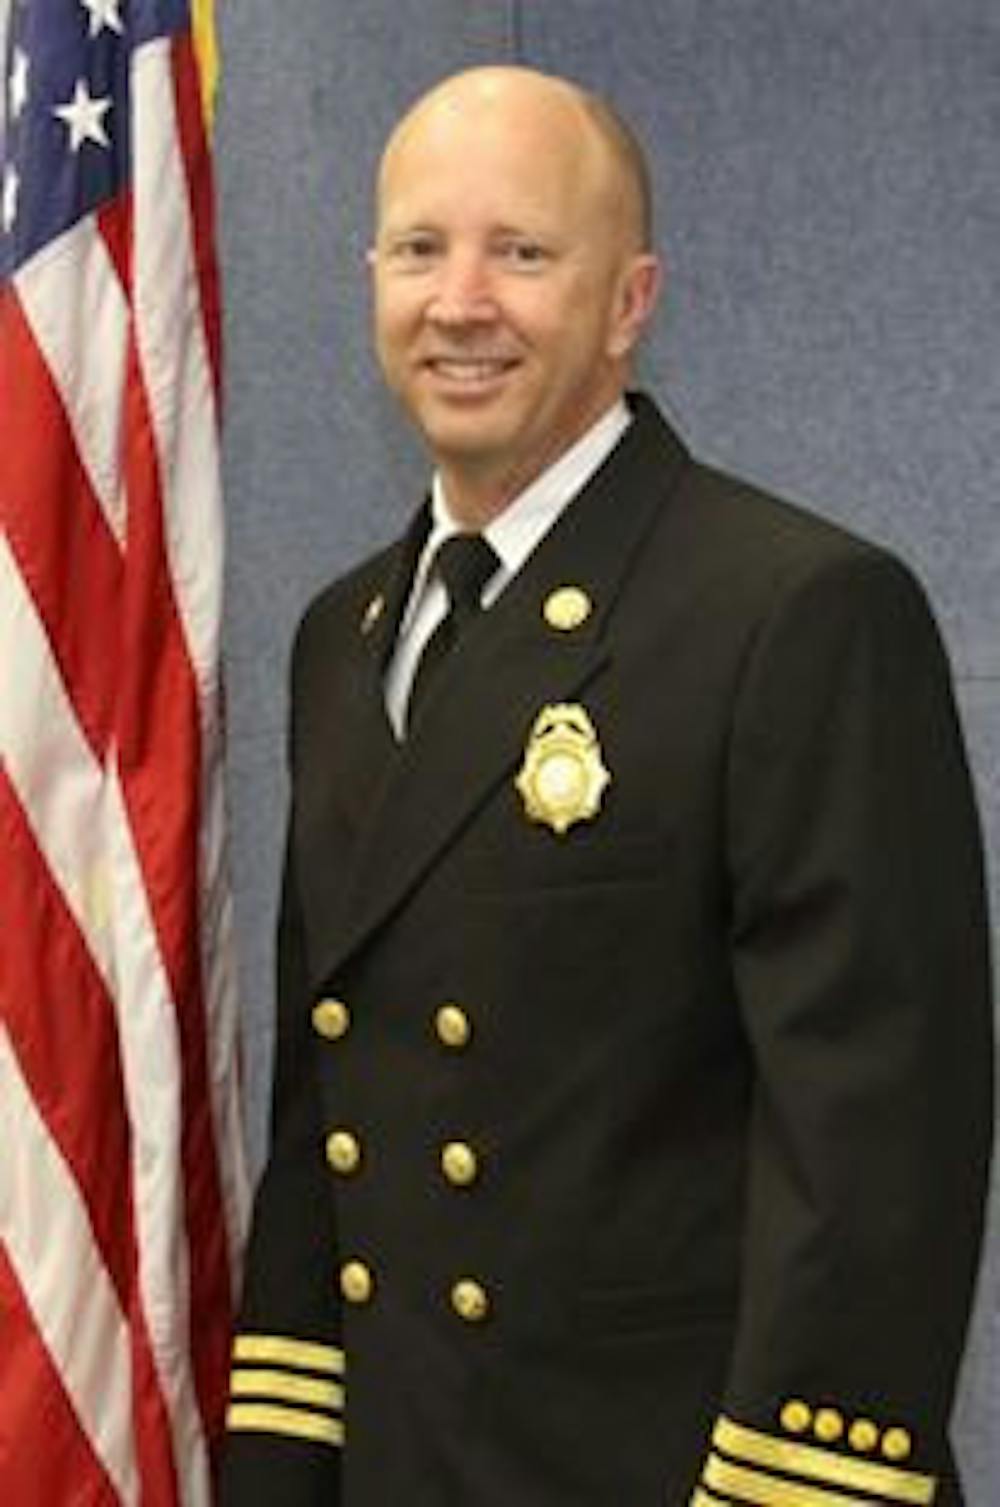 <p>The Alachua County Commission unanimously confirmed Harold Theus as the county's new fire chief.</p>